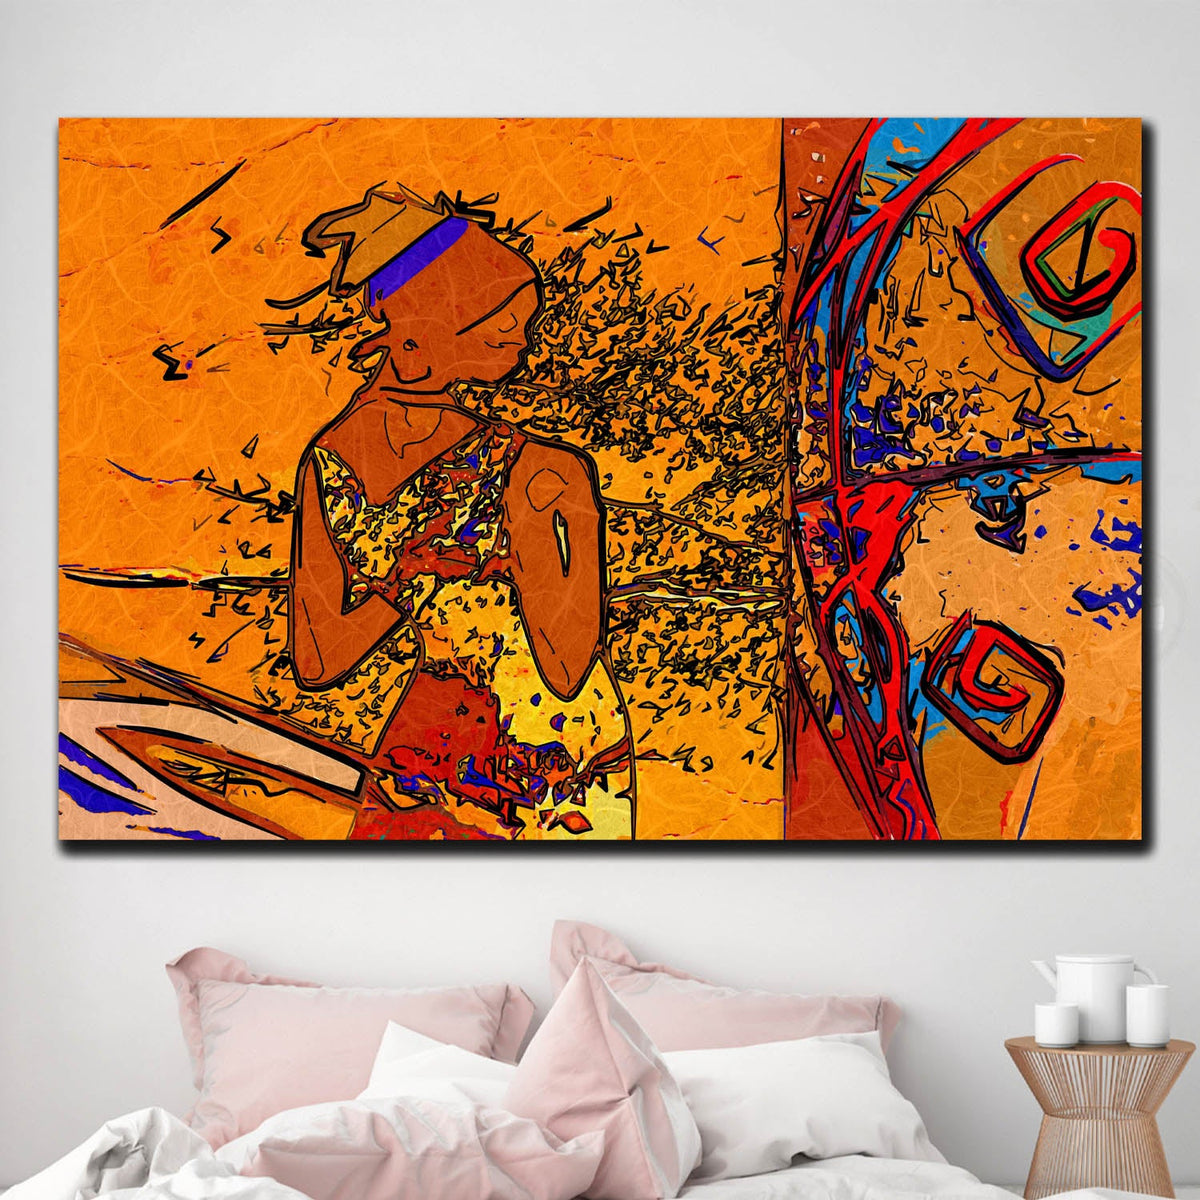 https://cdn.shopify.com/s/files/1/0387/9986/8044/products/AbstractAfricanWomanCanvasArtprintStretched-1.jpg